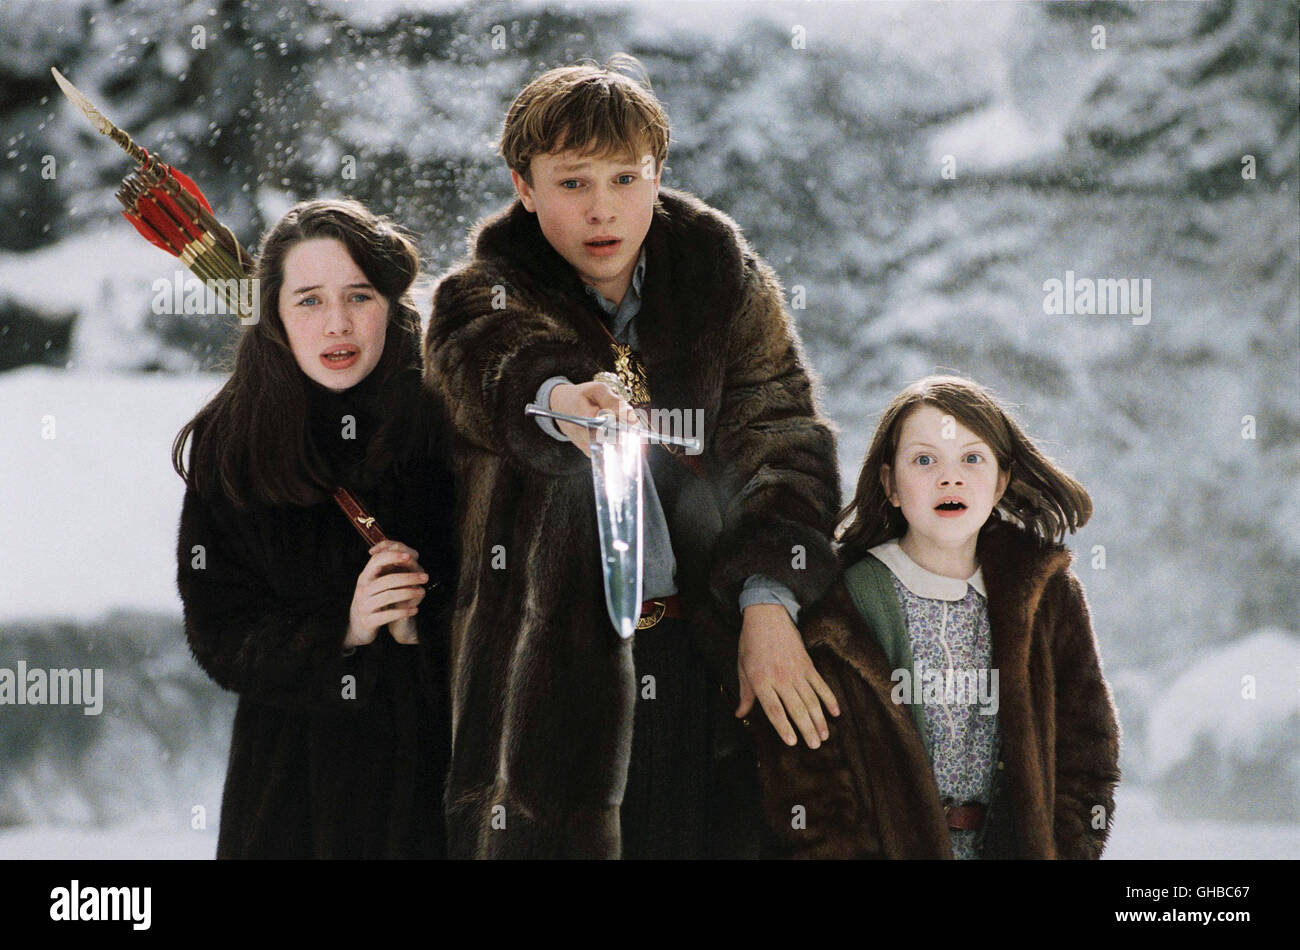 DIE CHRONIKEN VON NARNIA: DER KÖNIG VON NARNIA The Chronicles of Narnia: The Lion, The Witch & The Wardrobe USA 2005 Andrew Adamson Susan (ANNA POPPLEWELL), Peter (WILLIAM MOSELEY) and Lucy (GEORGIE HENLEY) Regie: Andrew Adamson aka. The Chronicles of Narnia: The Lion, The Witch & The Wardrobe Stock Photo